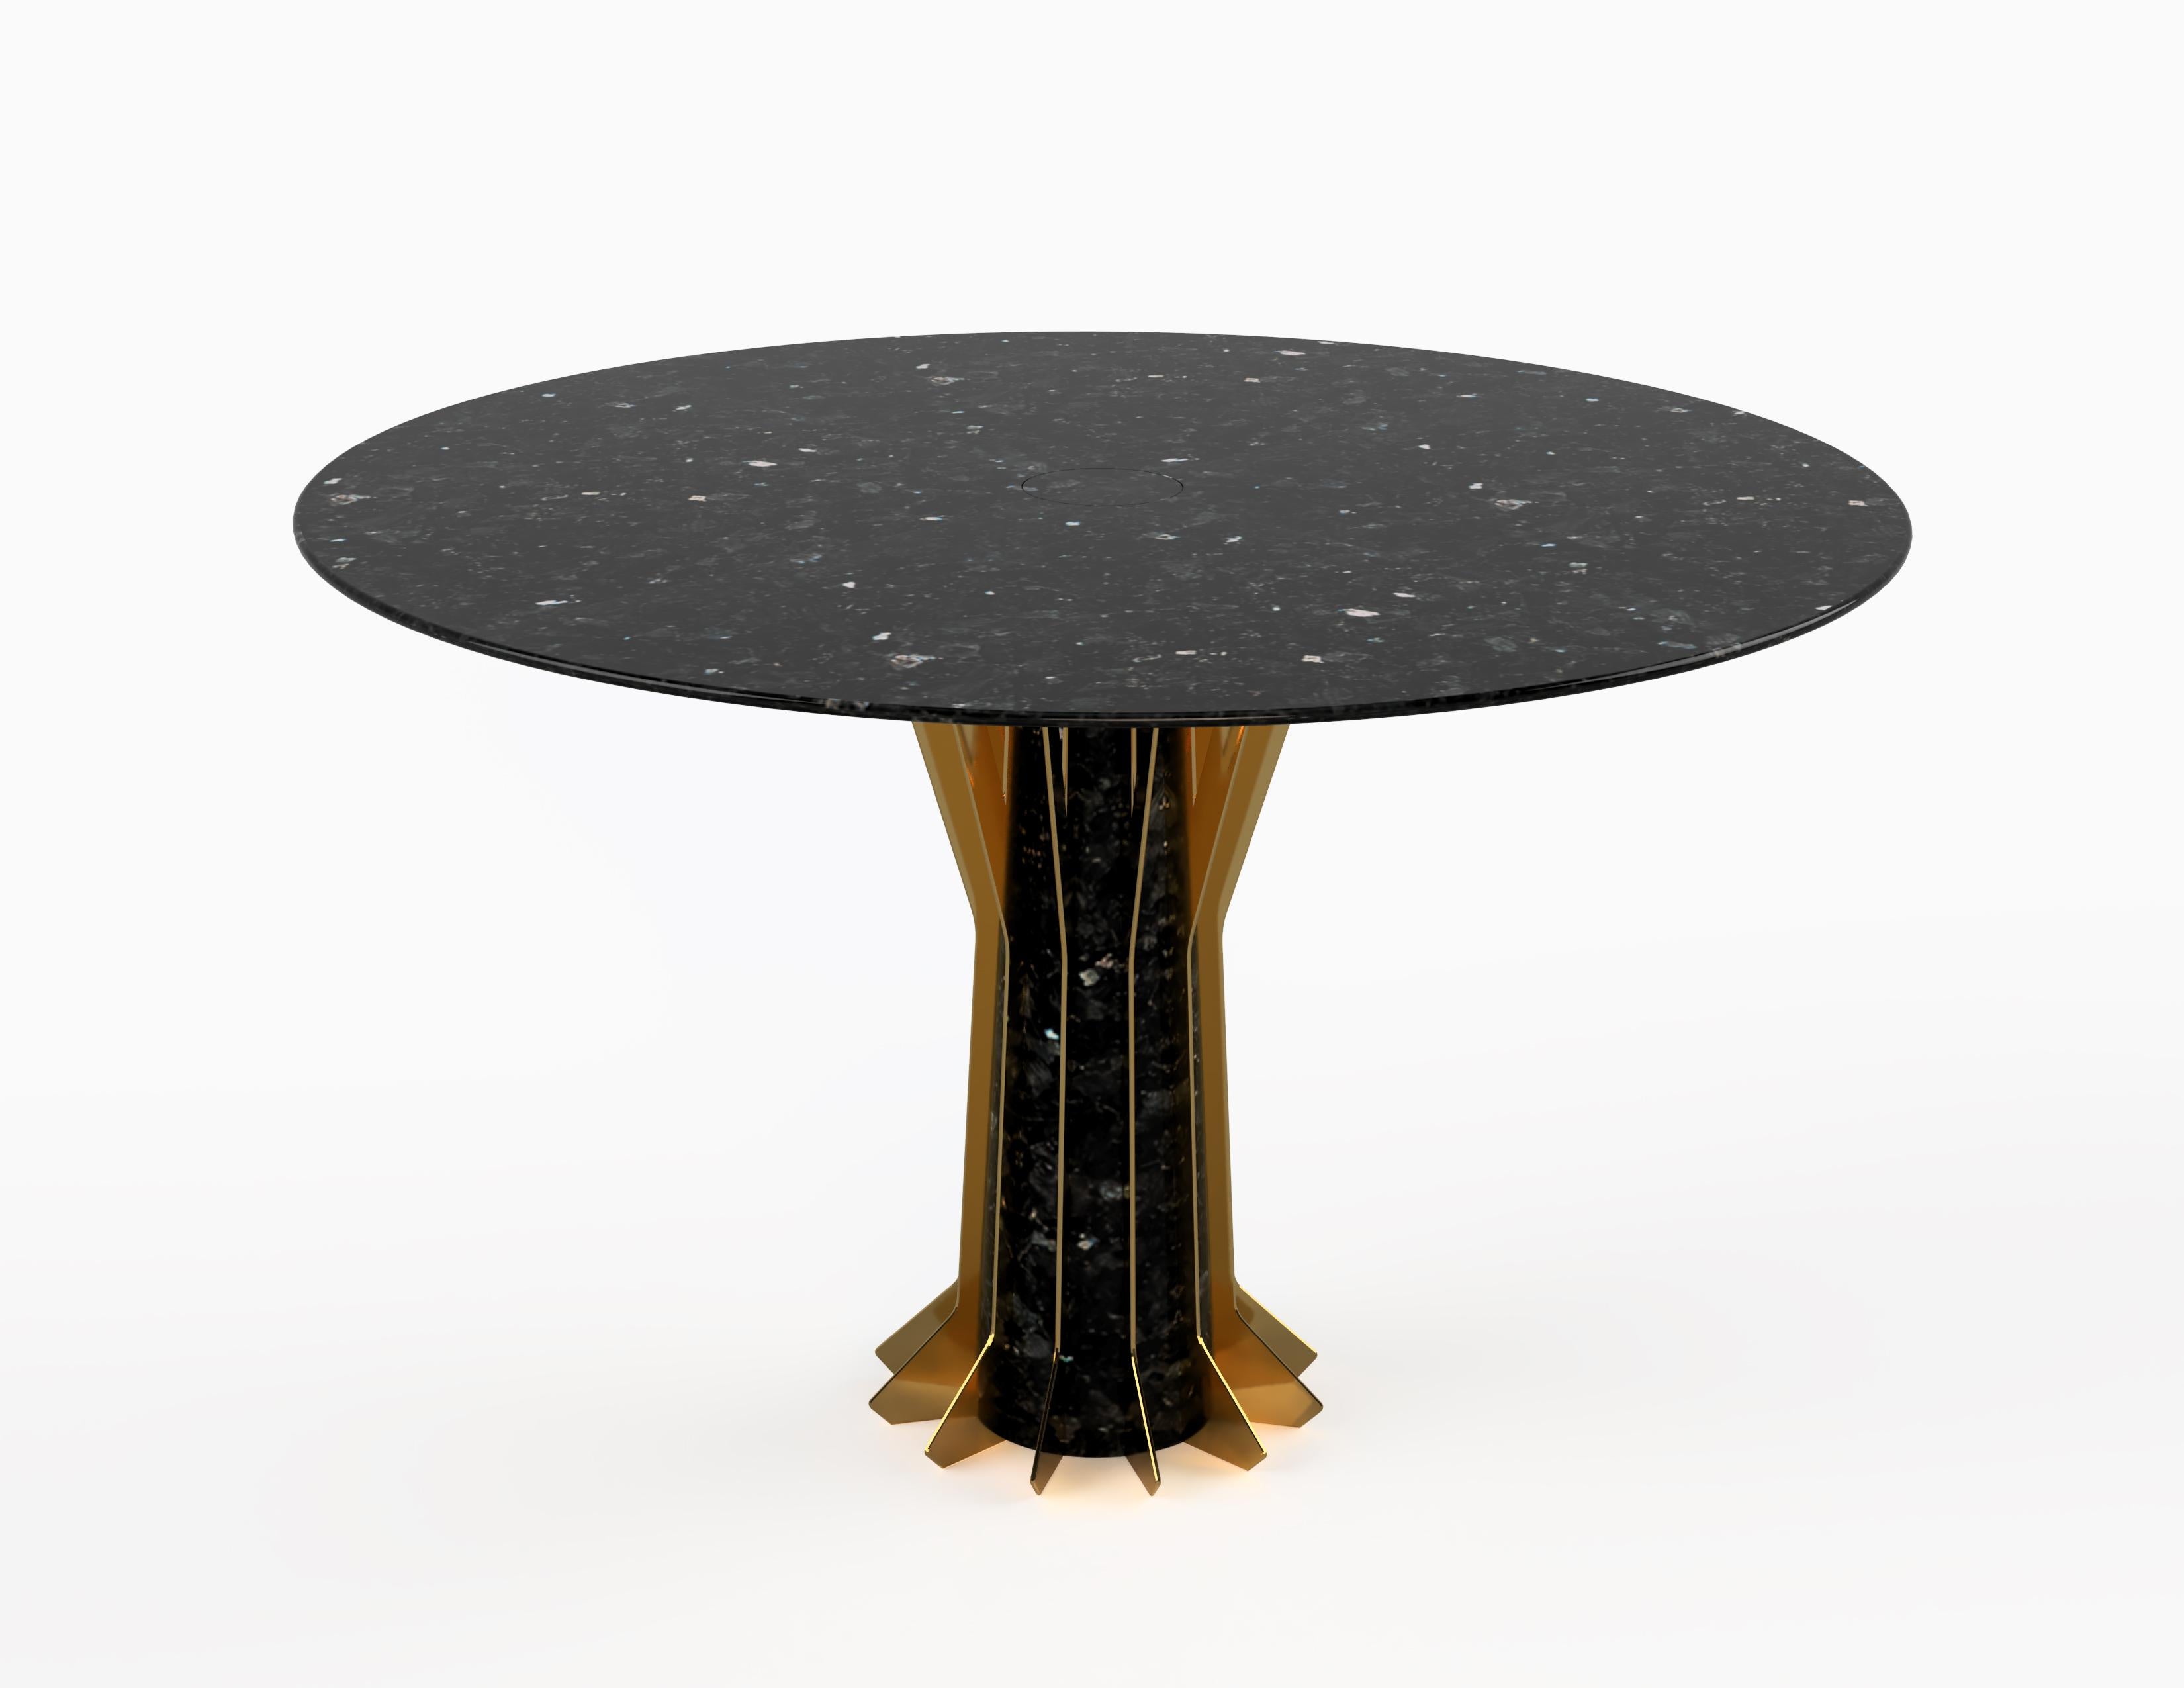 The Icar's wings center table by Grzegorz Majka, 2021
Dimensions: 51.18 x 51.18 x 29.53 in
Materials: stone, brass

Elegance exemplified in table's understated simplicity. As a tribute to embellishment we have designed the Icar's Wings center